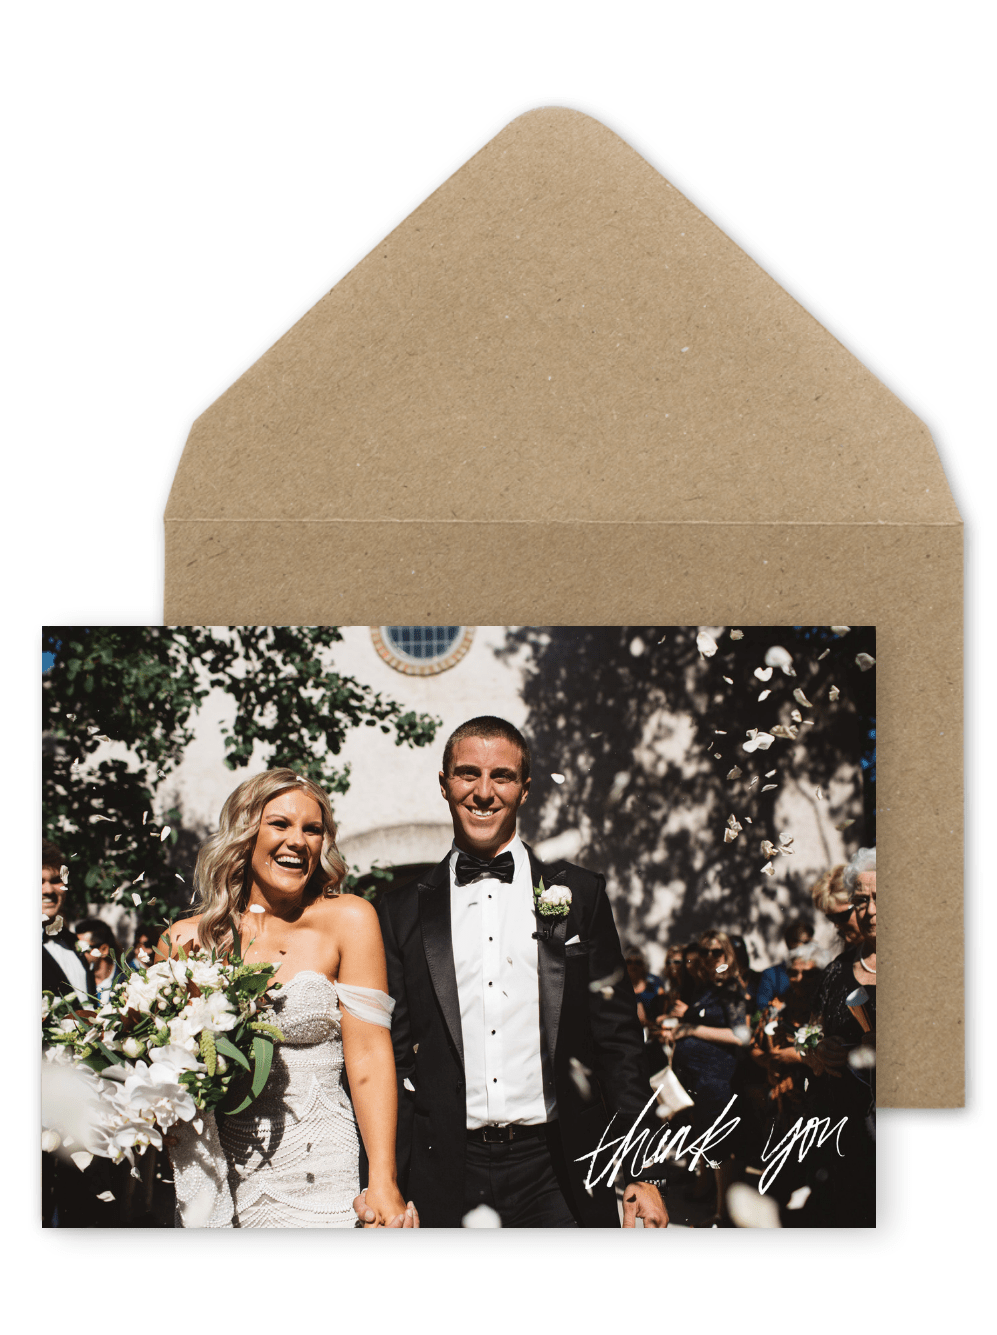 Rustic Wedding Thank You Card The White Tree Photography For the Love of Stationery